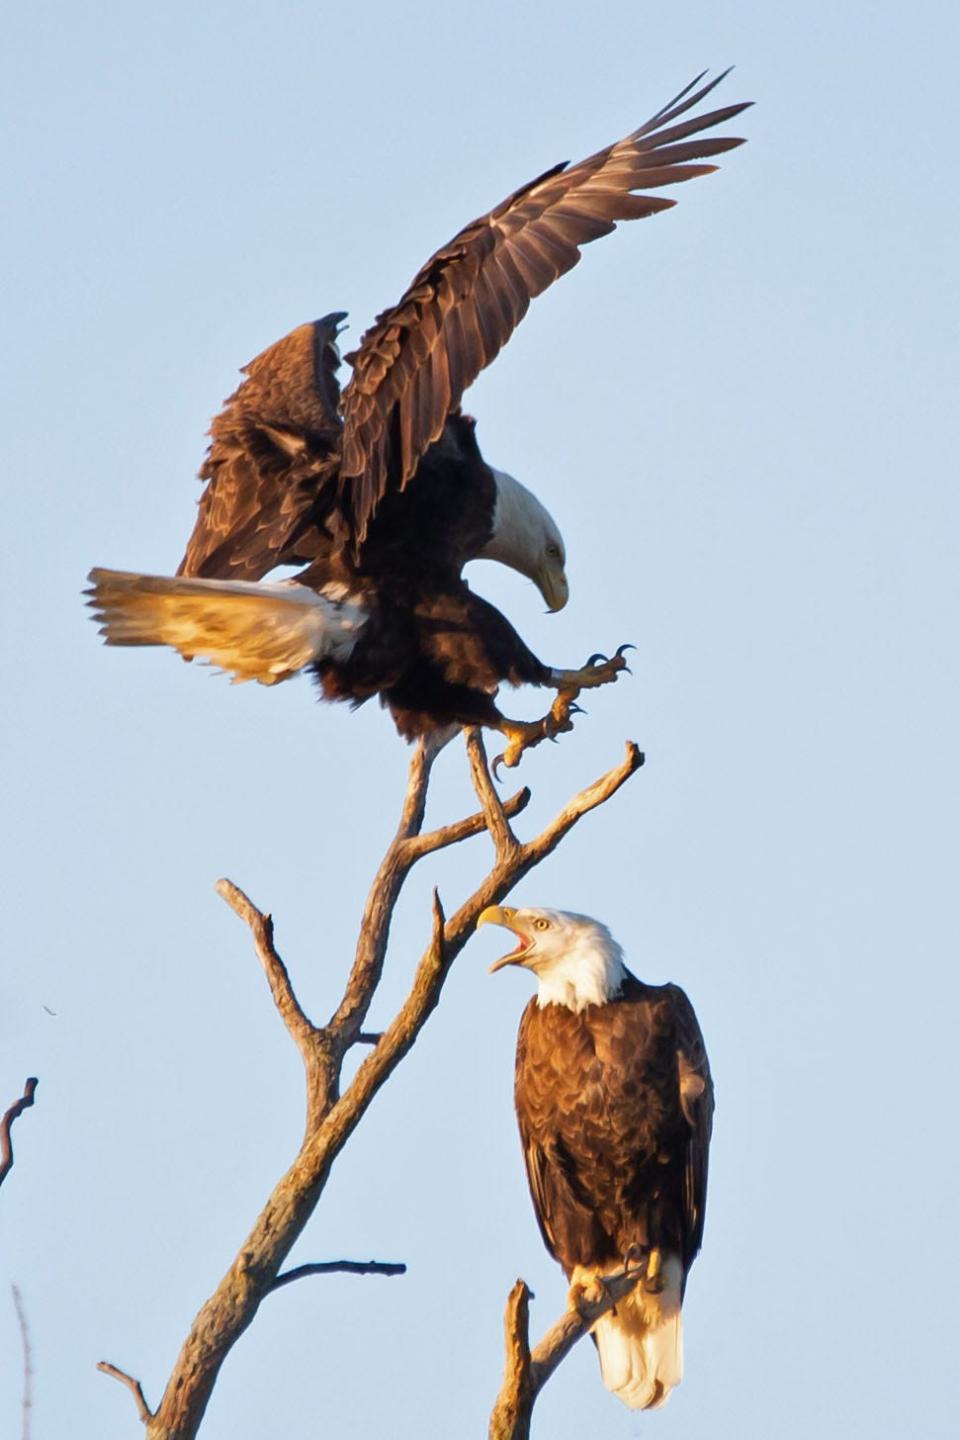 An eagle pair has a disagreement in a tree near Gibsonburg. The female eagle, top, had just left the nest near sunset, and was trying to coax her mate to go back to the nest to tend to their newly hatched young. Eaglets hatch in late March to early April and fledge in mid to late June. The young eagles usually leave the area starting in August, while the adults remain in their territory year round.